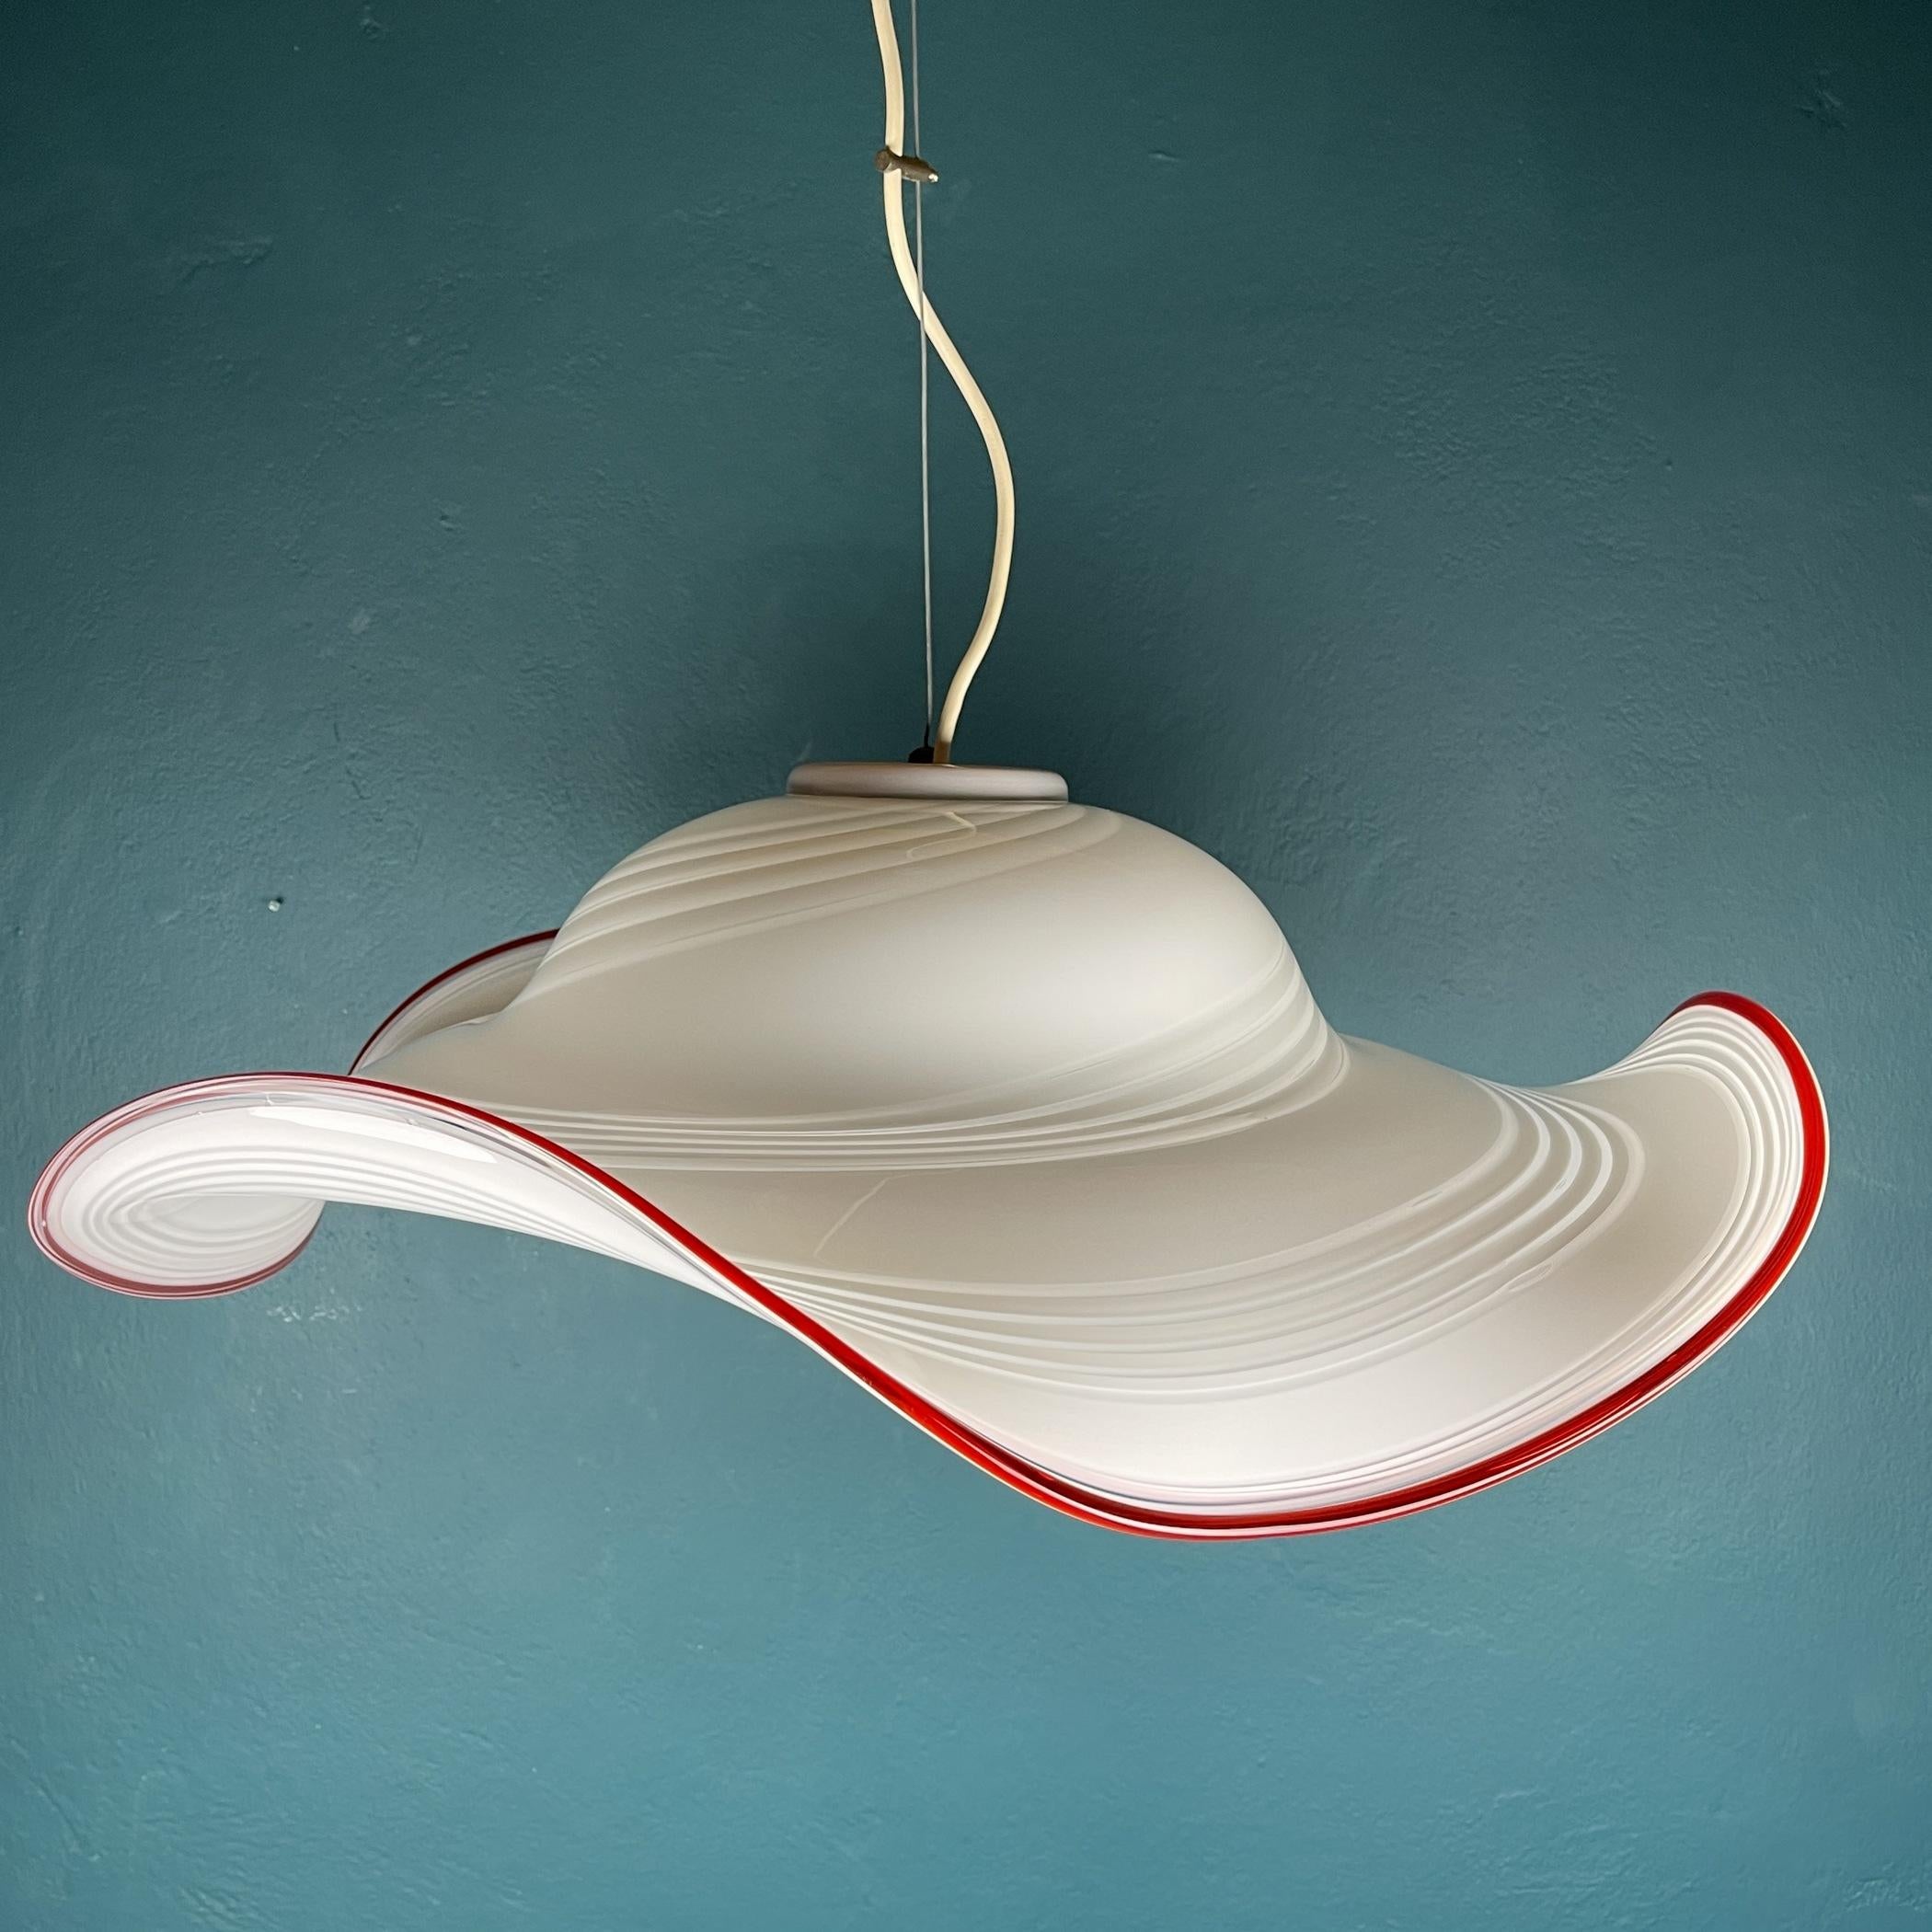 Vintage Swirl White Red Murano Glass Pendant Lamp, Italy, 1970s For Sale 6